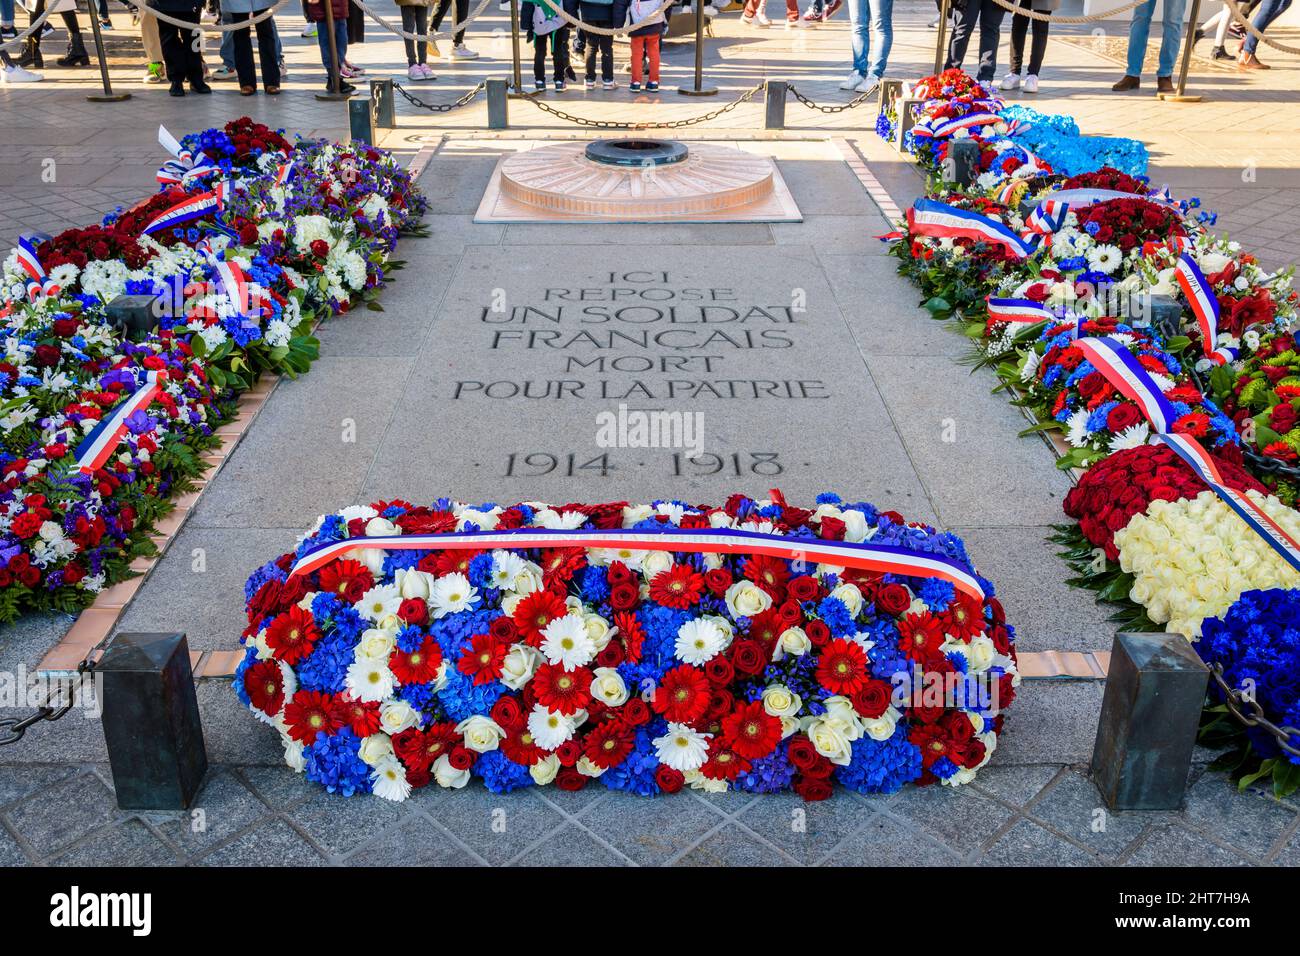 The Tomb of the Unknown Soldier, lying beneath the Arc de Triomphe in Paris, France, is adorned with funeral wreaths on the Armistice Day. Stock Photo